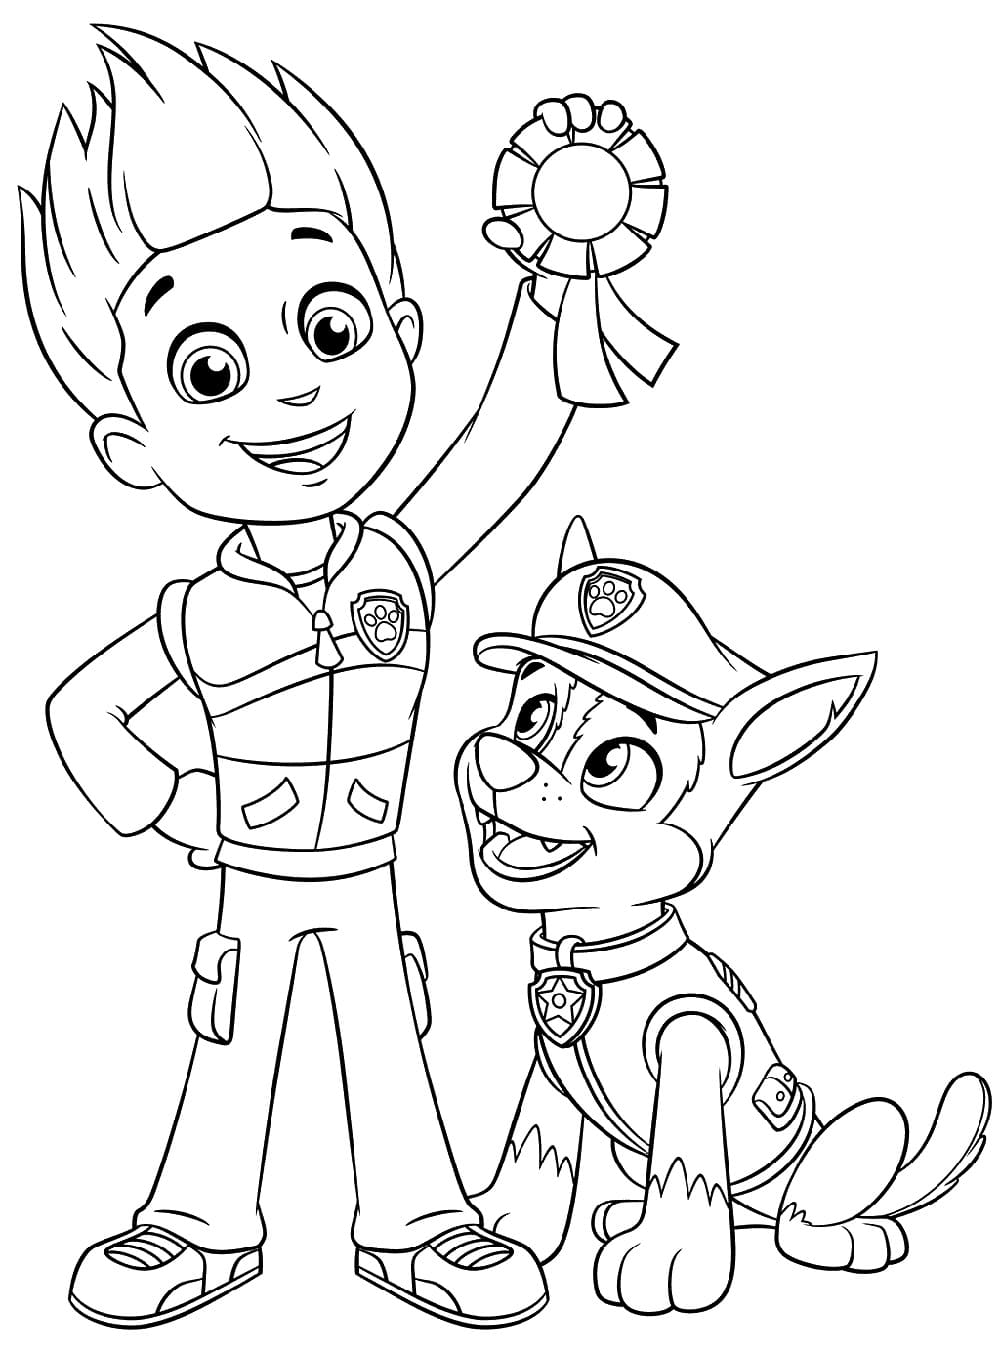 Ryder et Chase coloring page